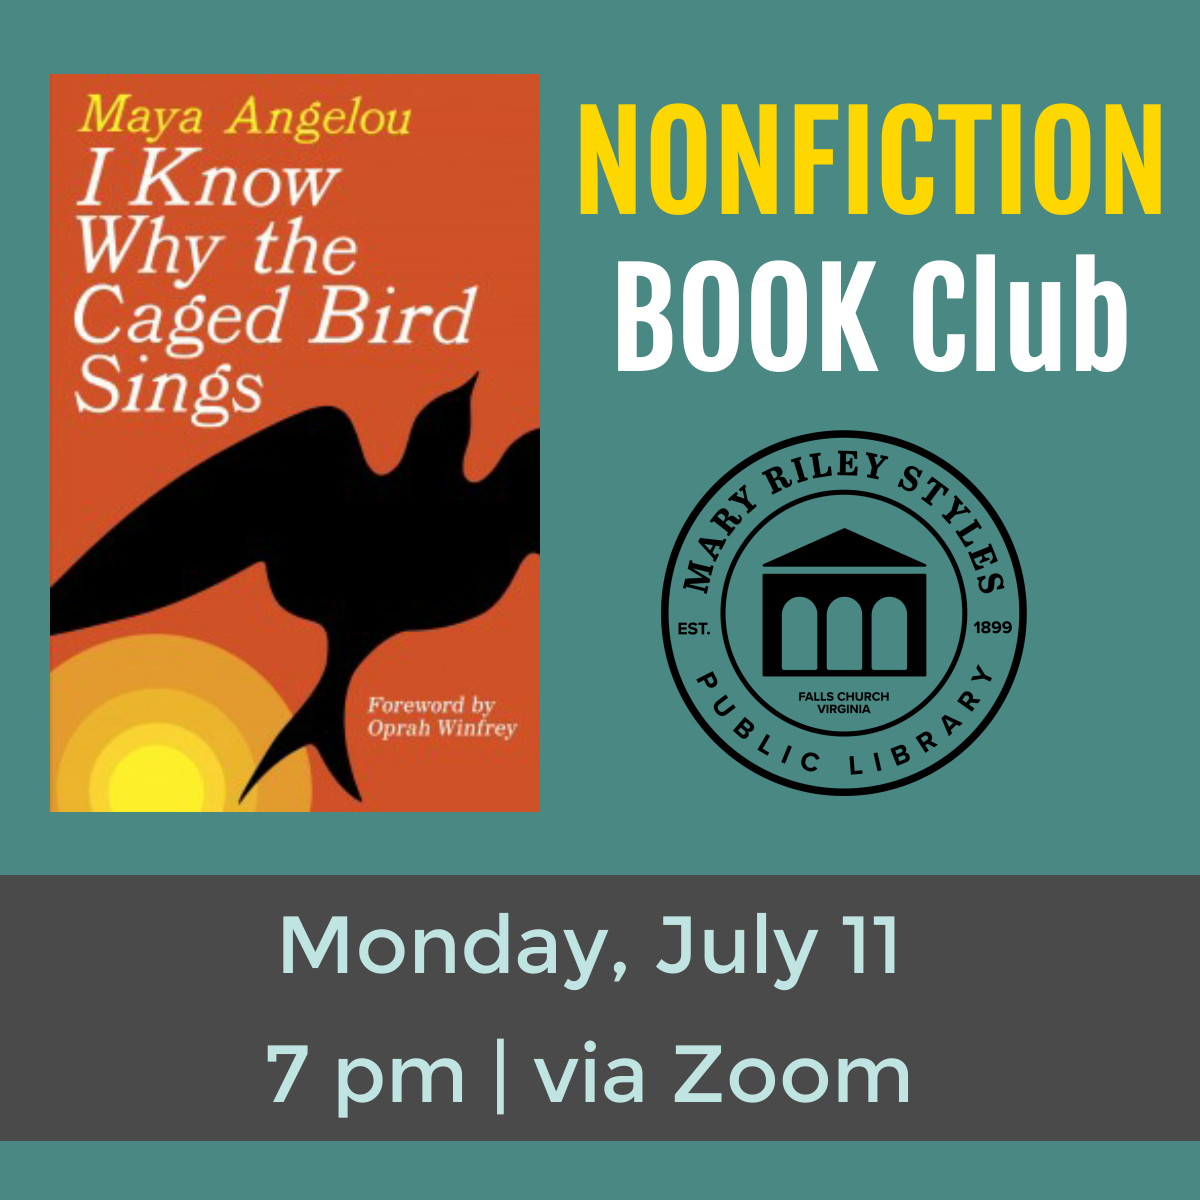 Nonfiction Book Club I know why the Caged Bird Sings on Monday, July 11